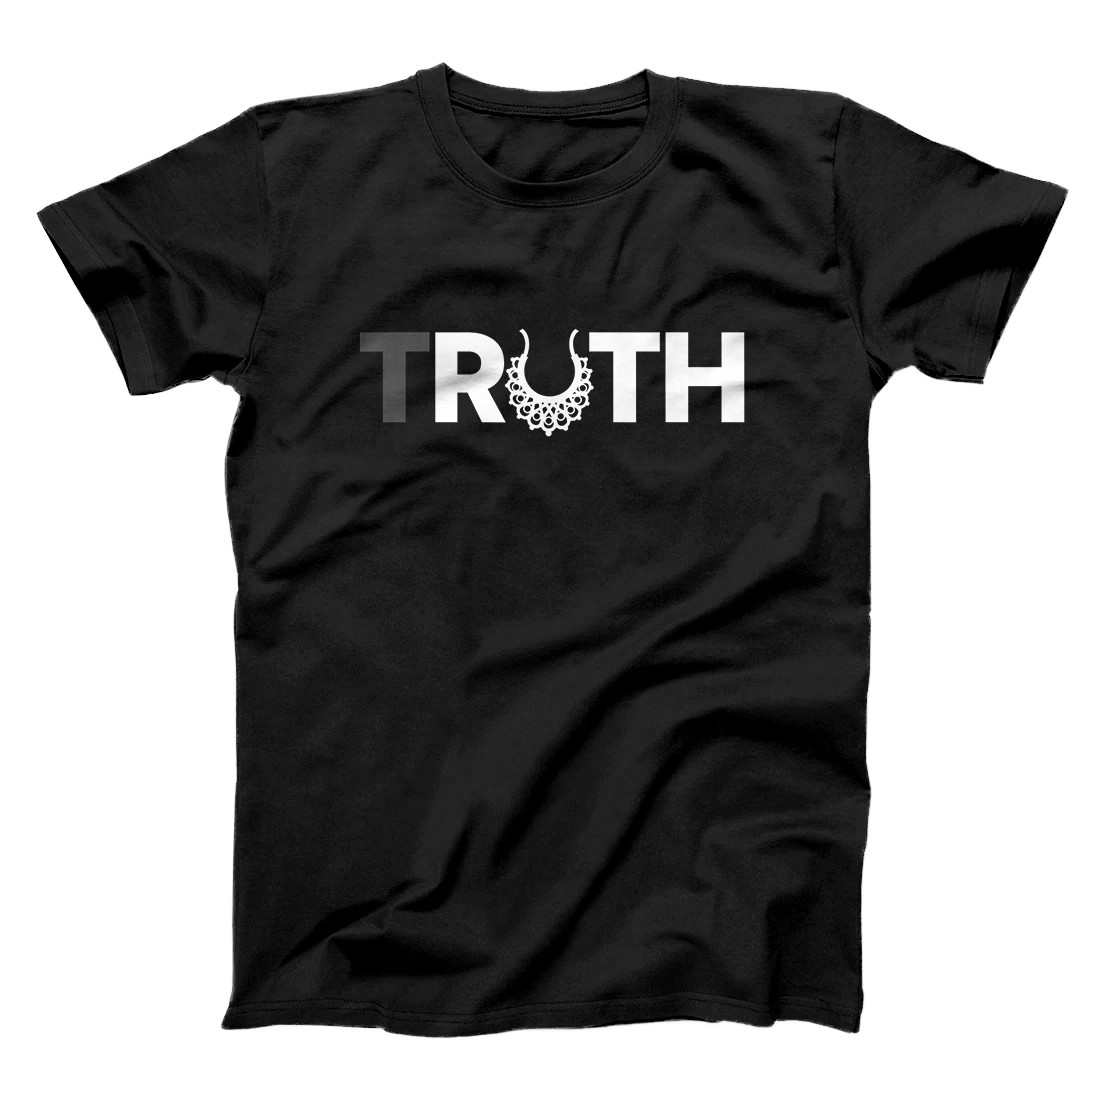 Personalized Justice Ruth Bader Ginsburg Truth Dissent Notorious RBG T-Shirt